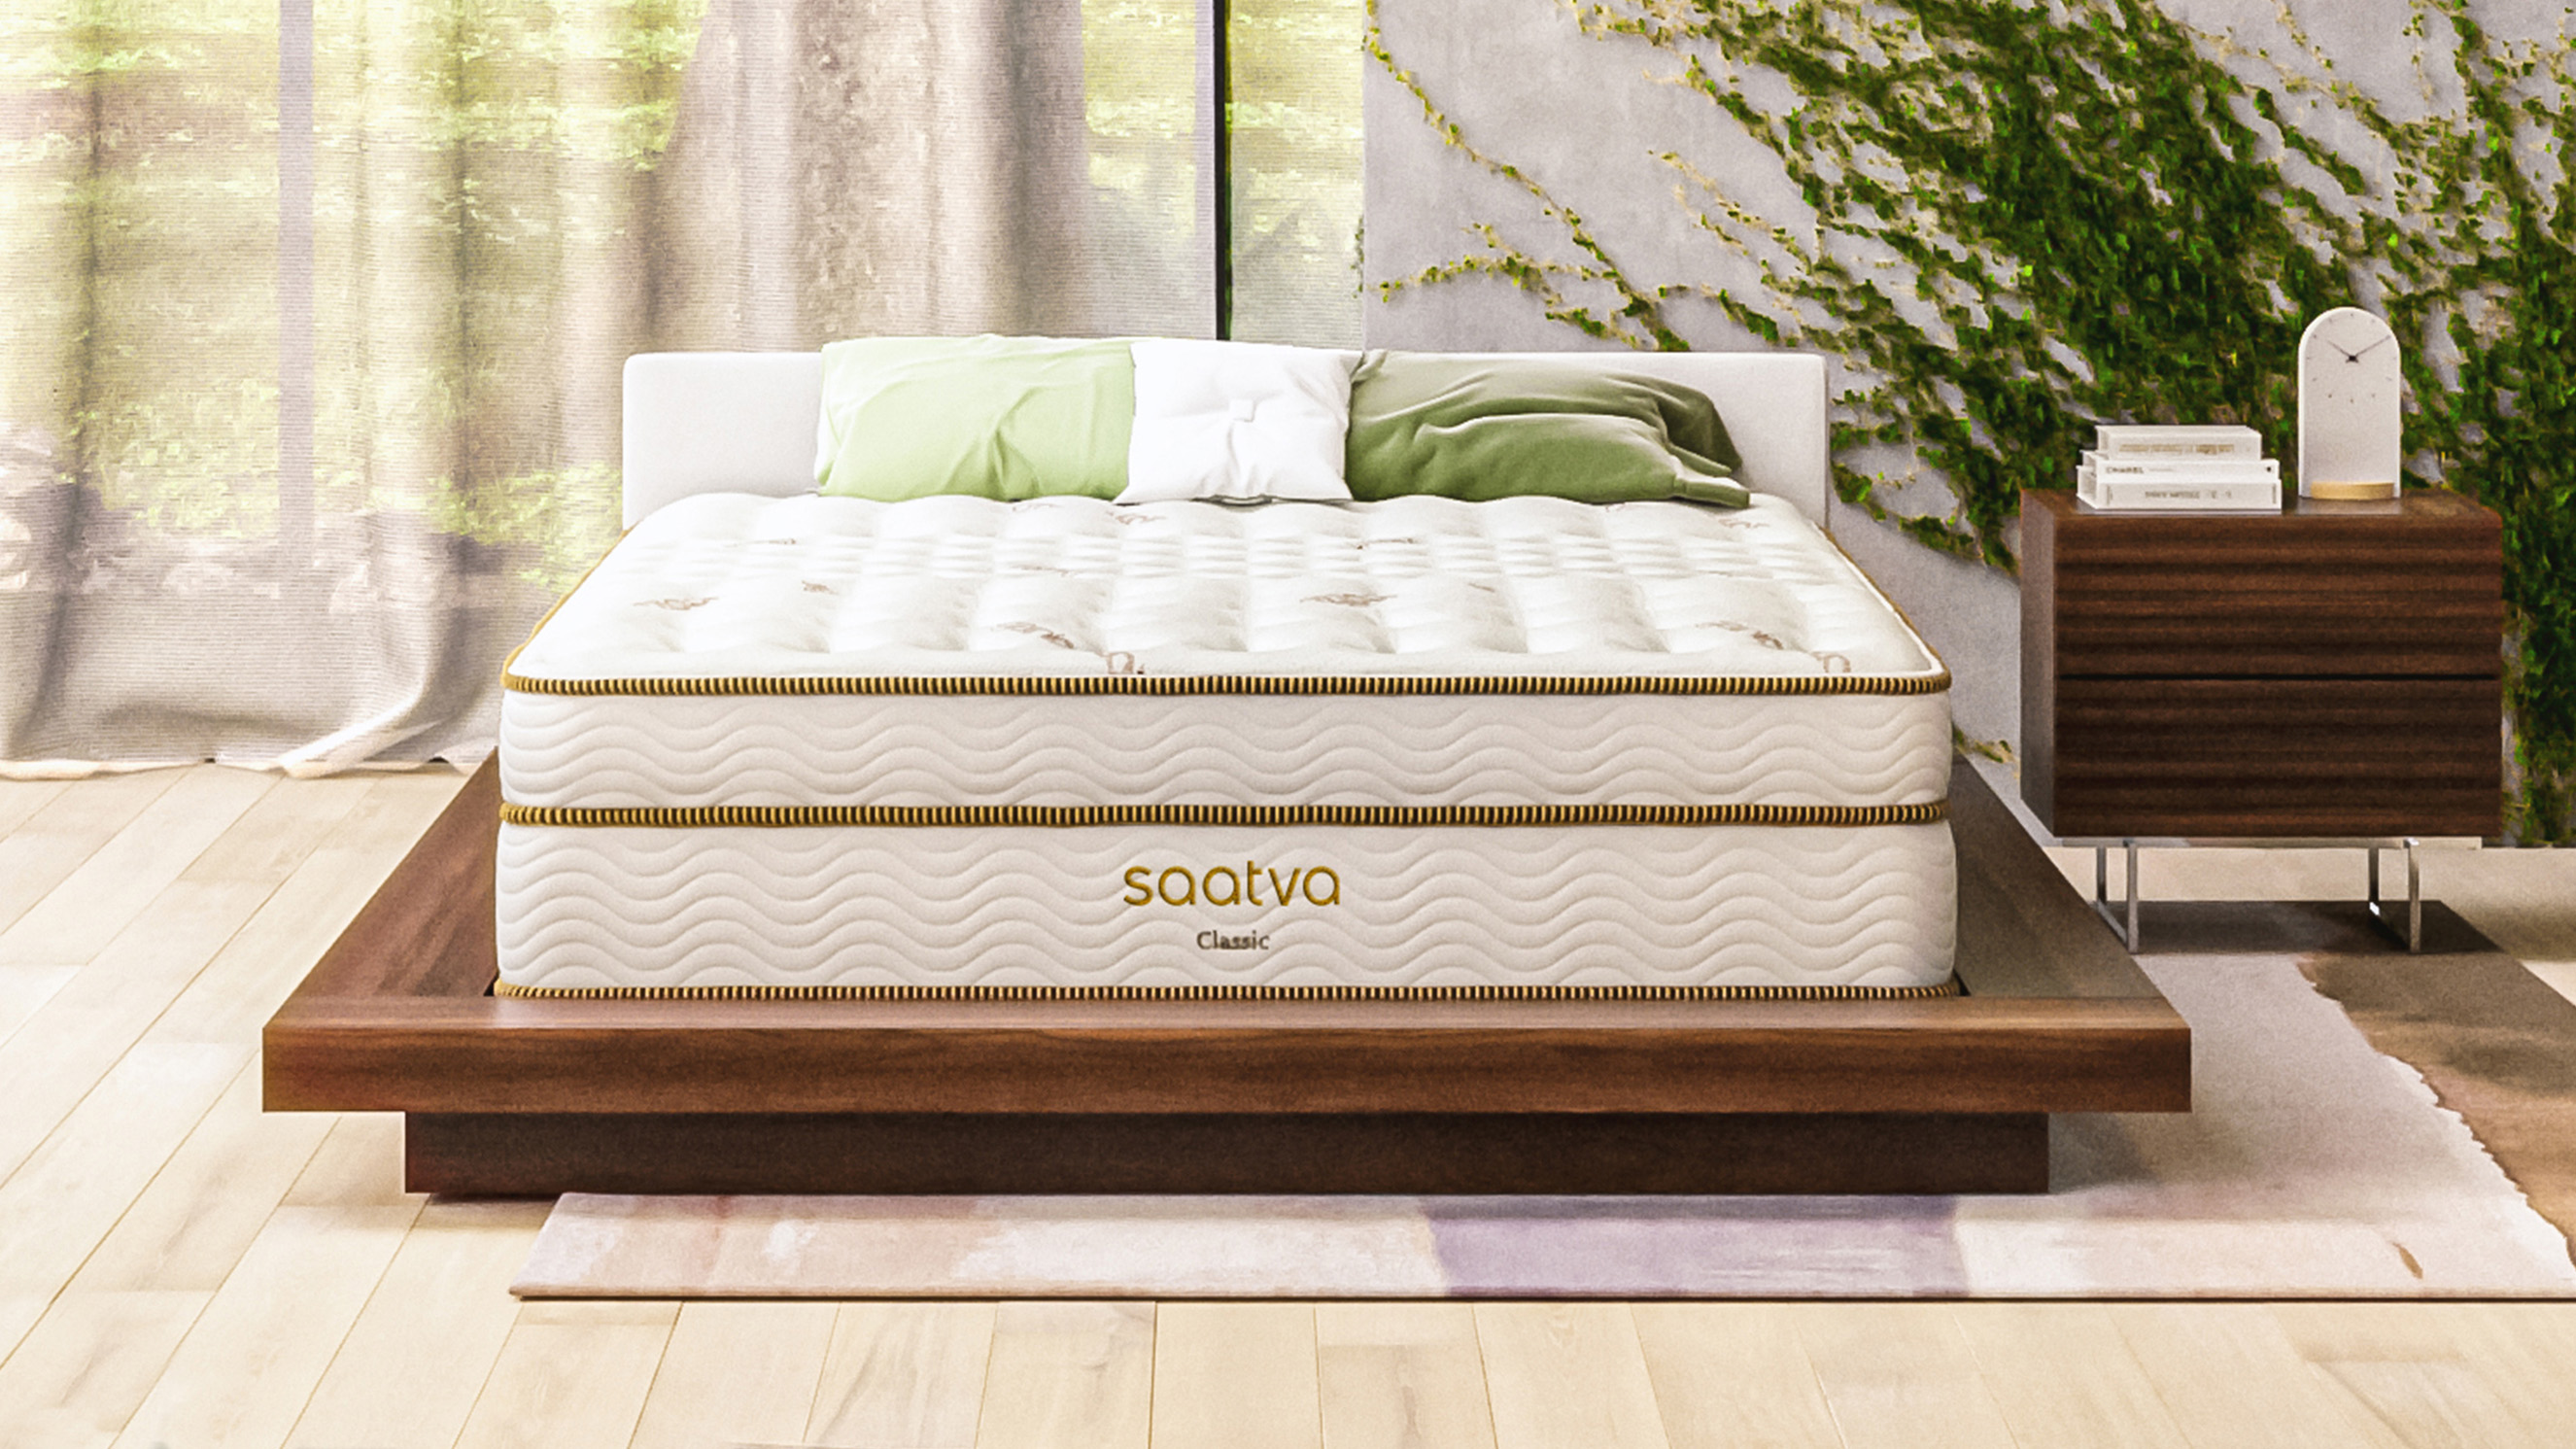 Saatva Classic mattress displayed on a light wood bed frame in an elegant bedroom